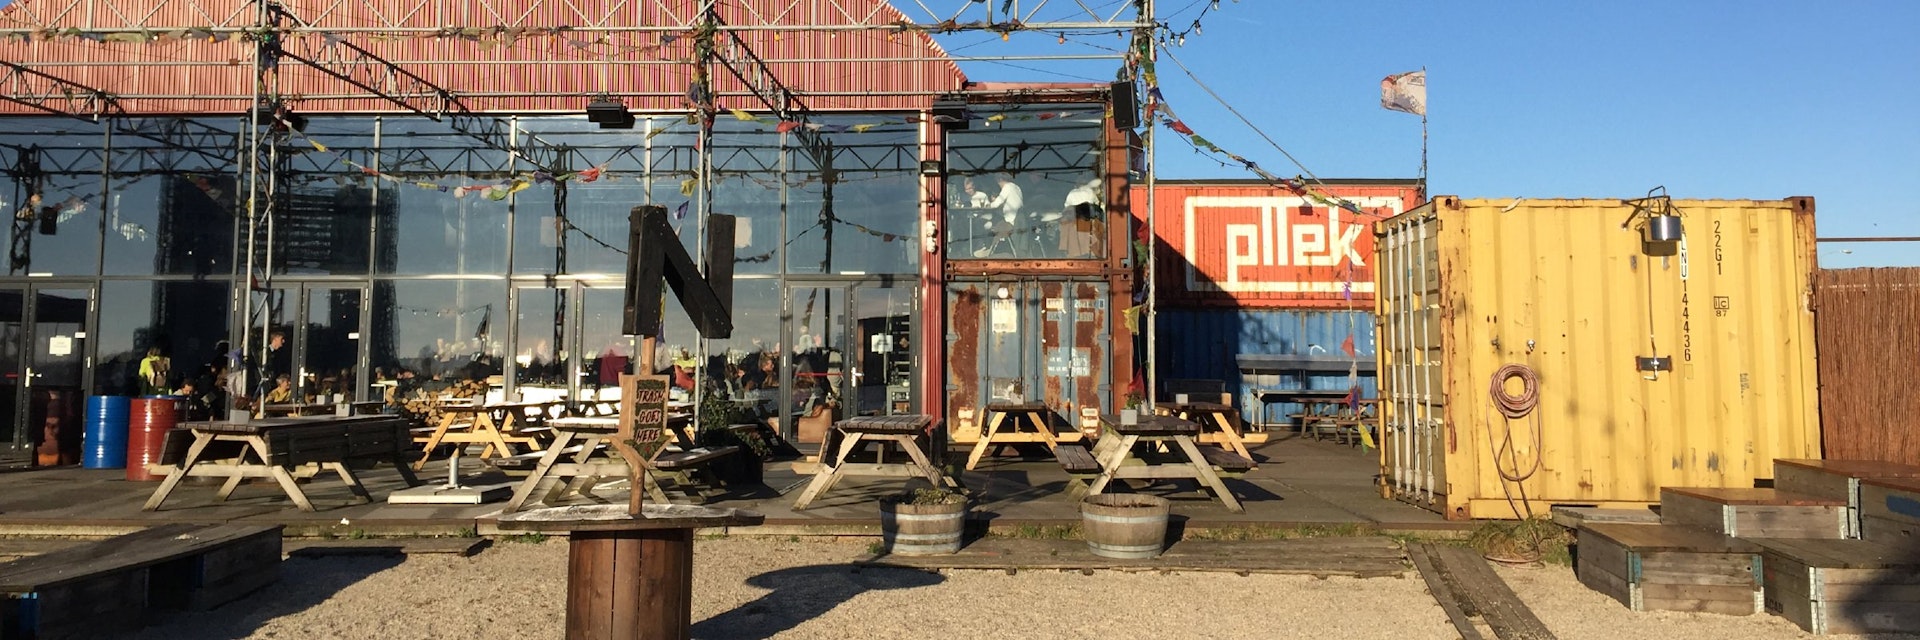 Pllek is built from old shipping containers